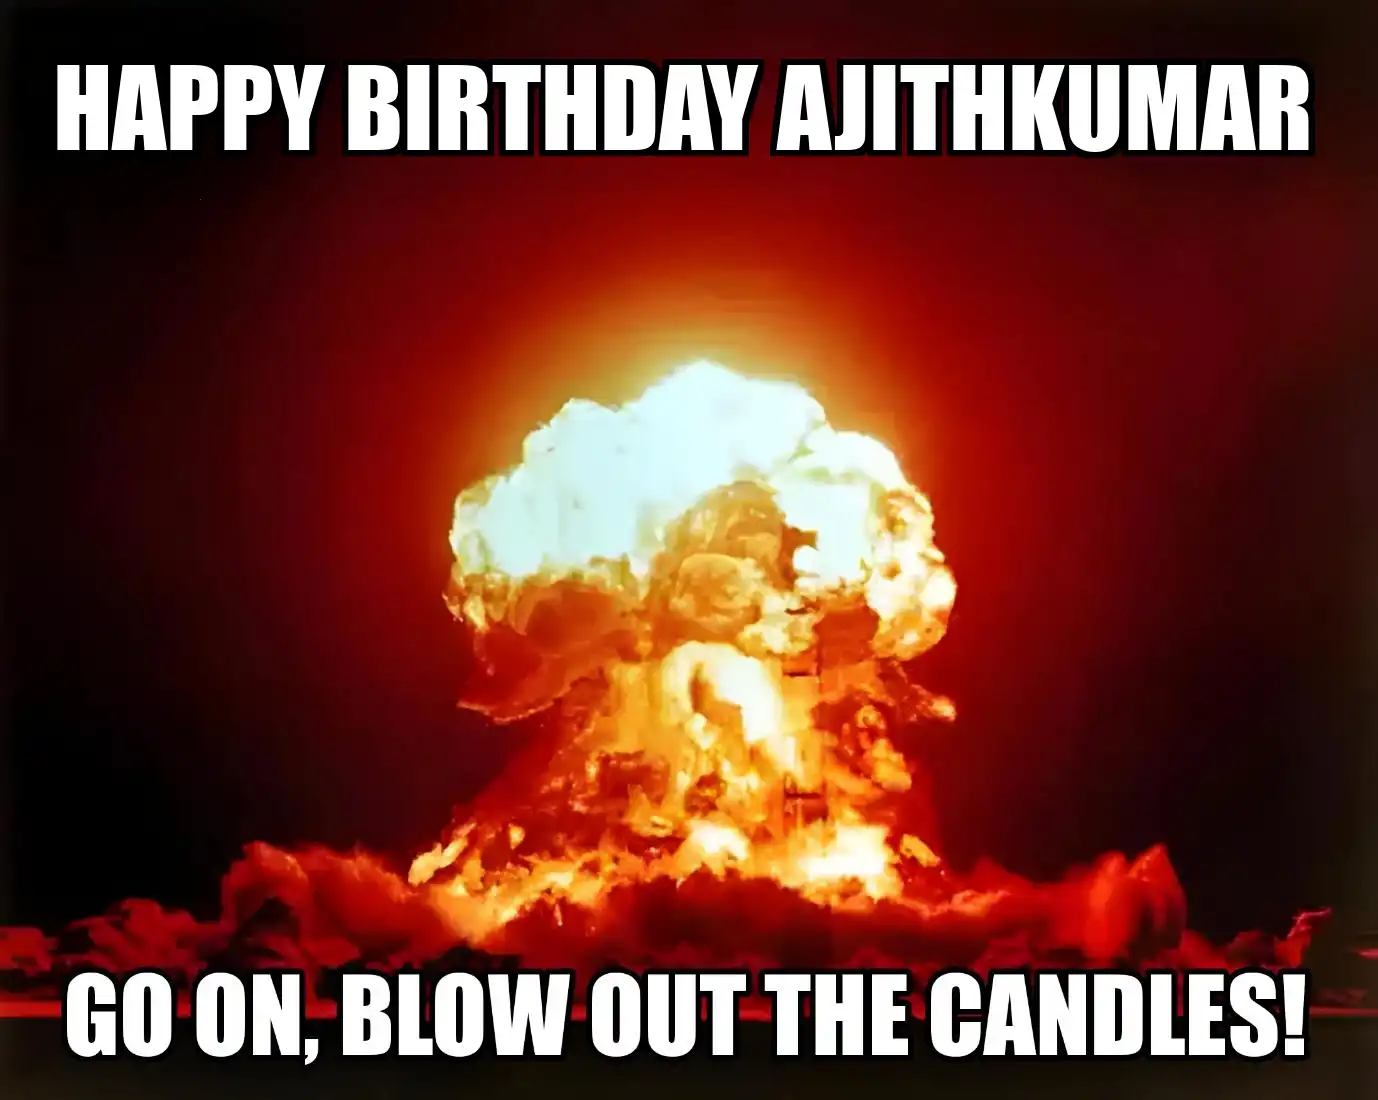 Happy Birthday Ajithkumar Go On Blow Out The Candles Meme